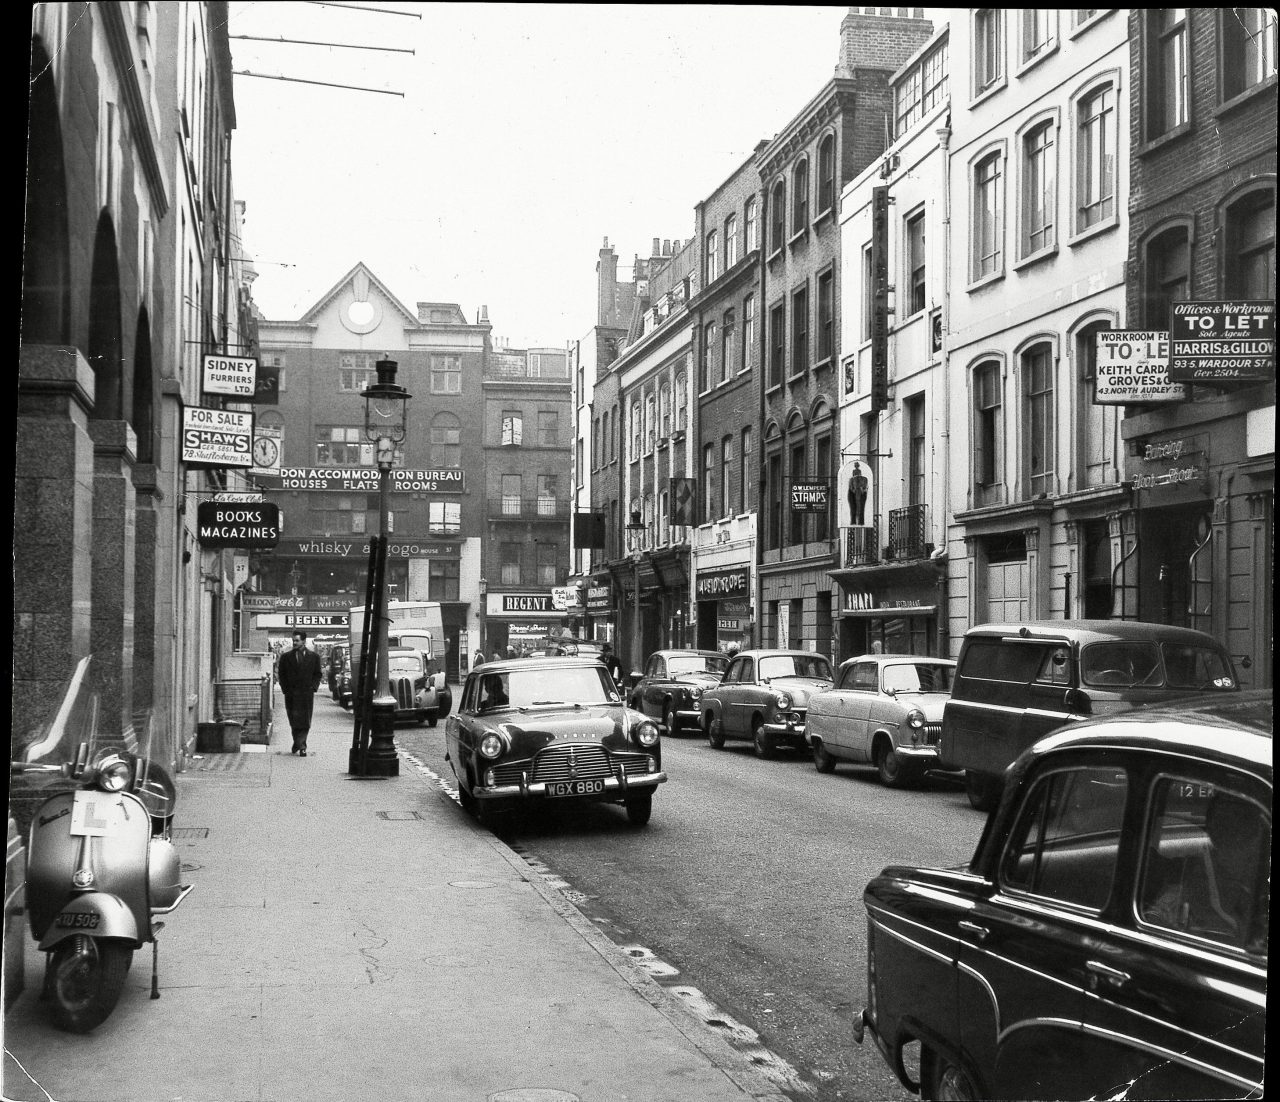 Sex, Drugs, Jazz and Gangsters – The Disreputable History of Gerrard Street in London’s Chinatown